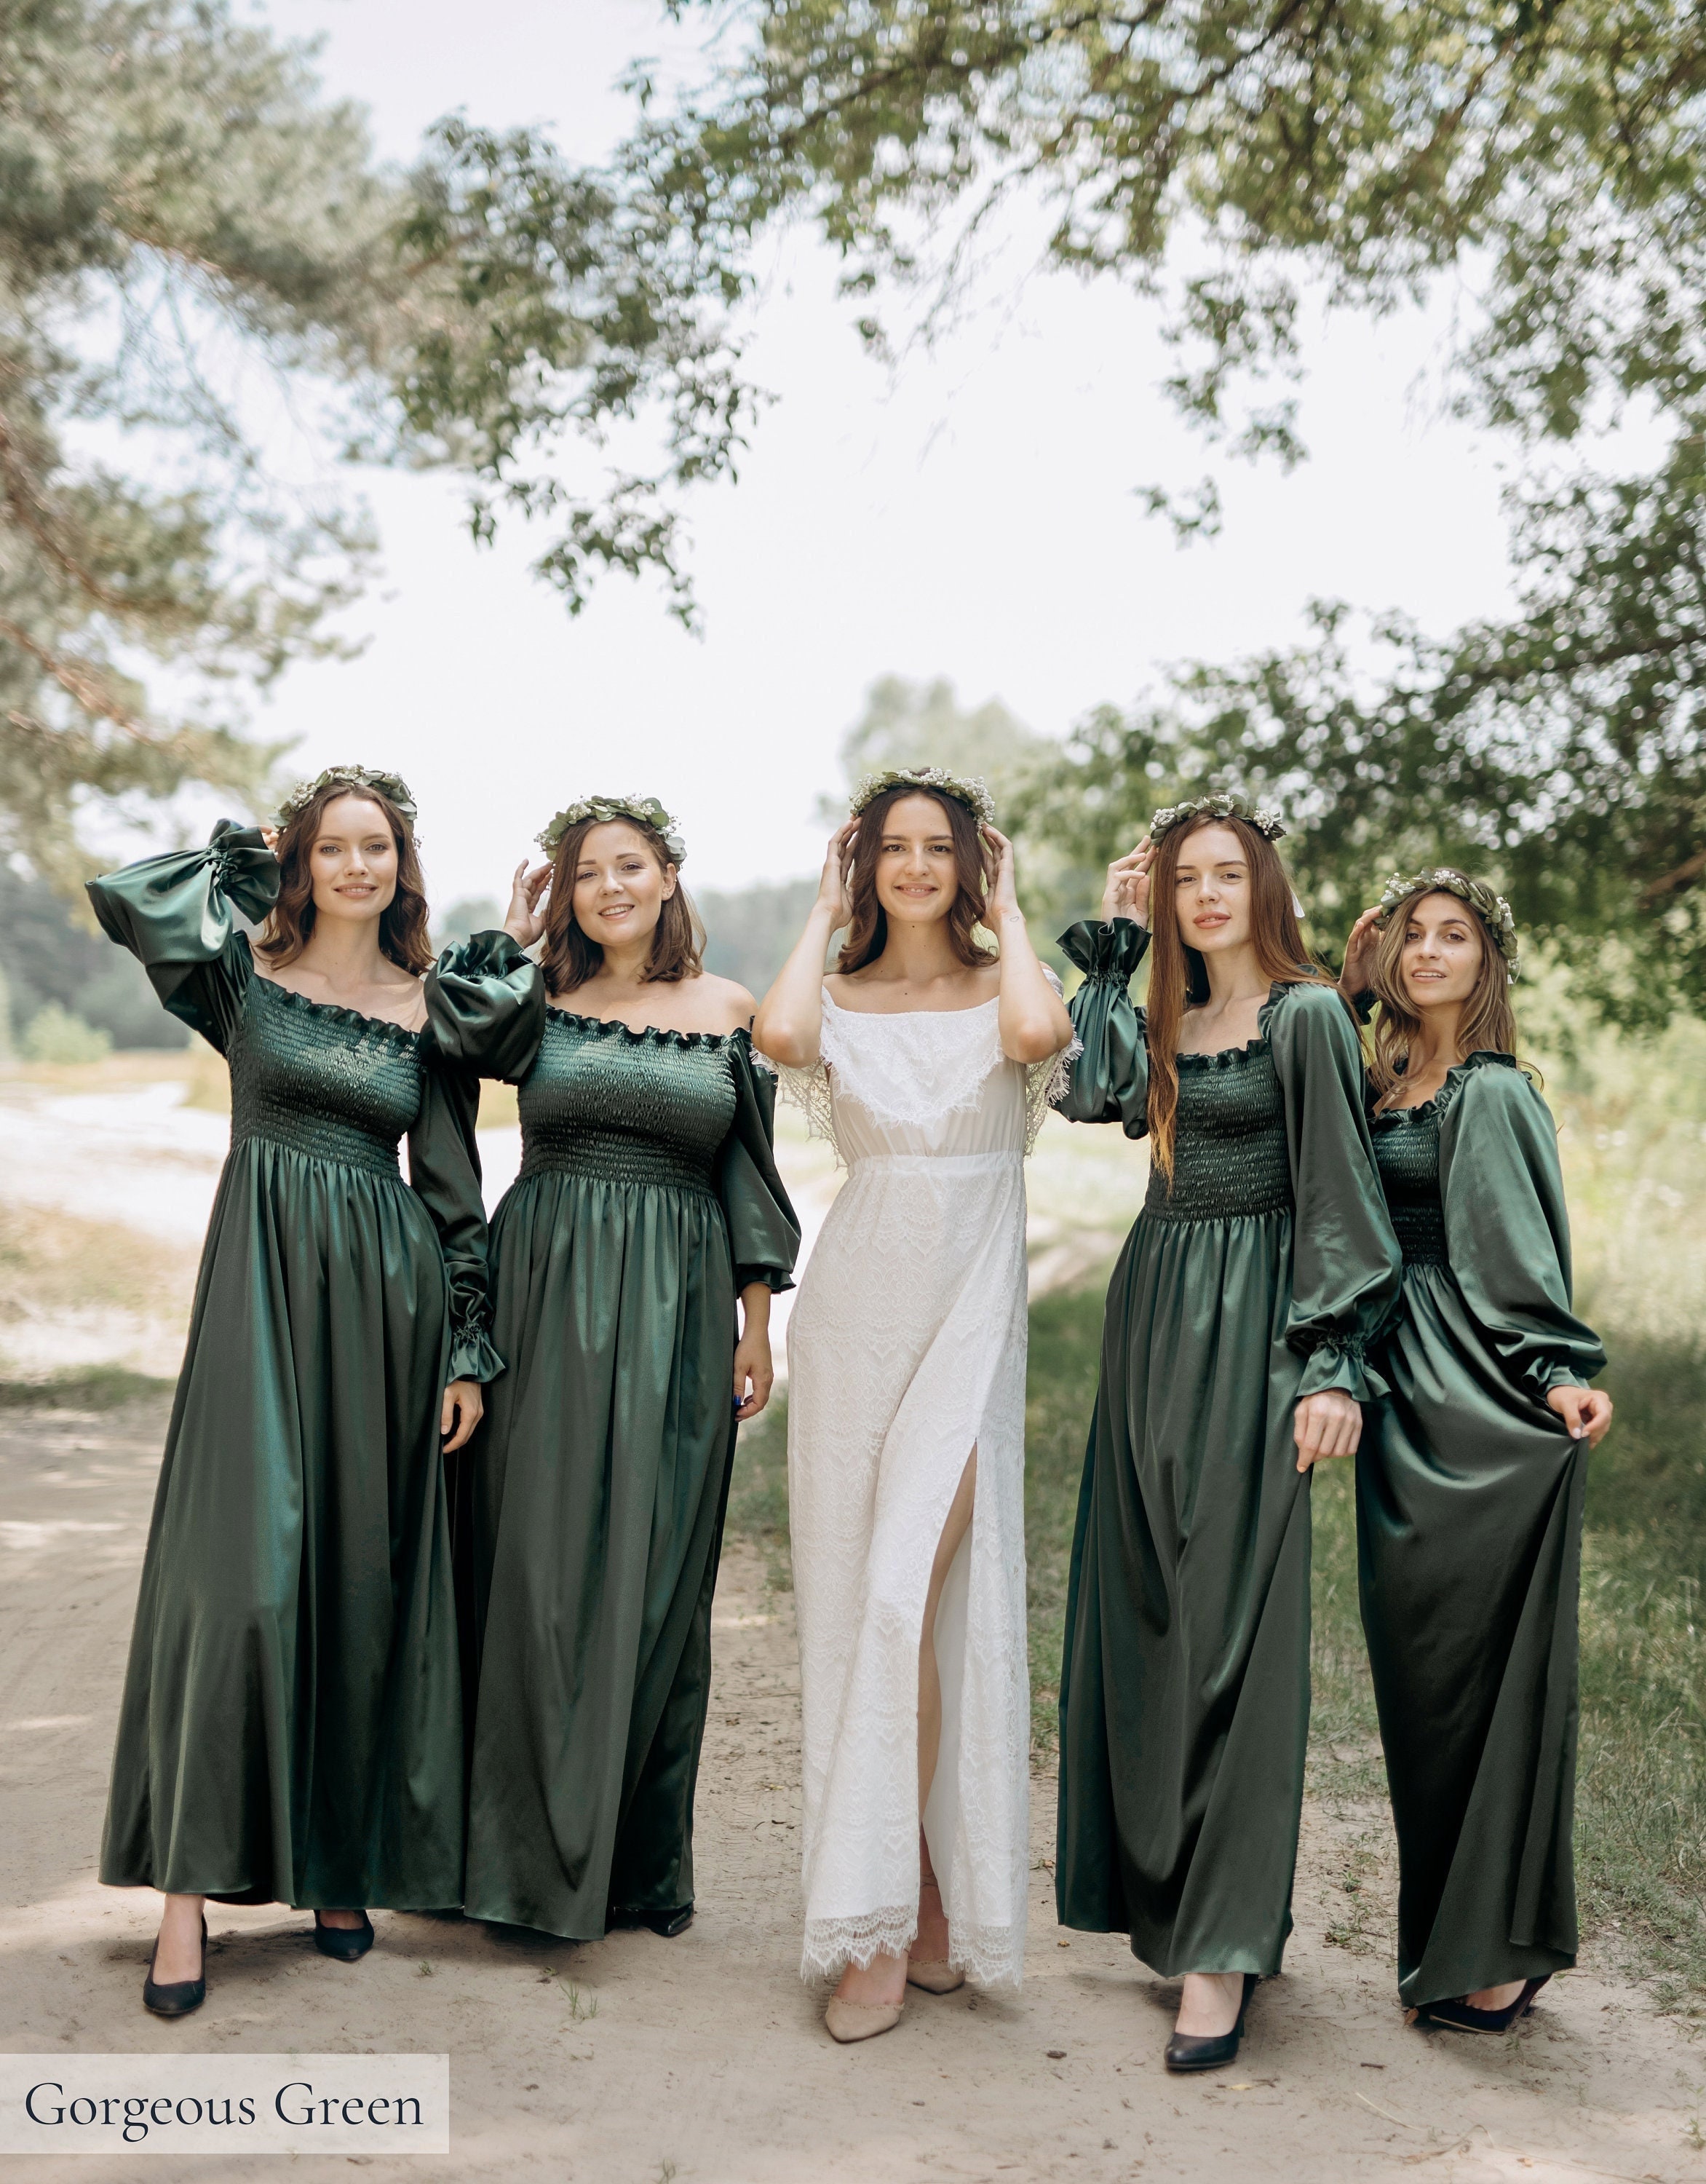 Is emerald green like this tacky for bridesmaid dresses? I was thinking of  still having them have pink flowers, similar to the ones lining the  pockets. FH is planning on dark blue